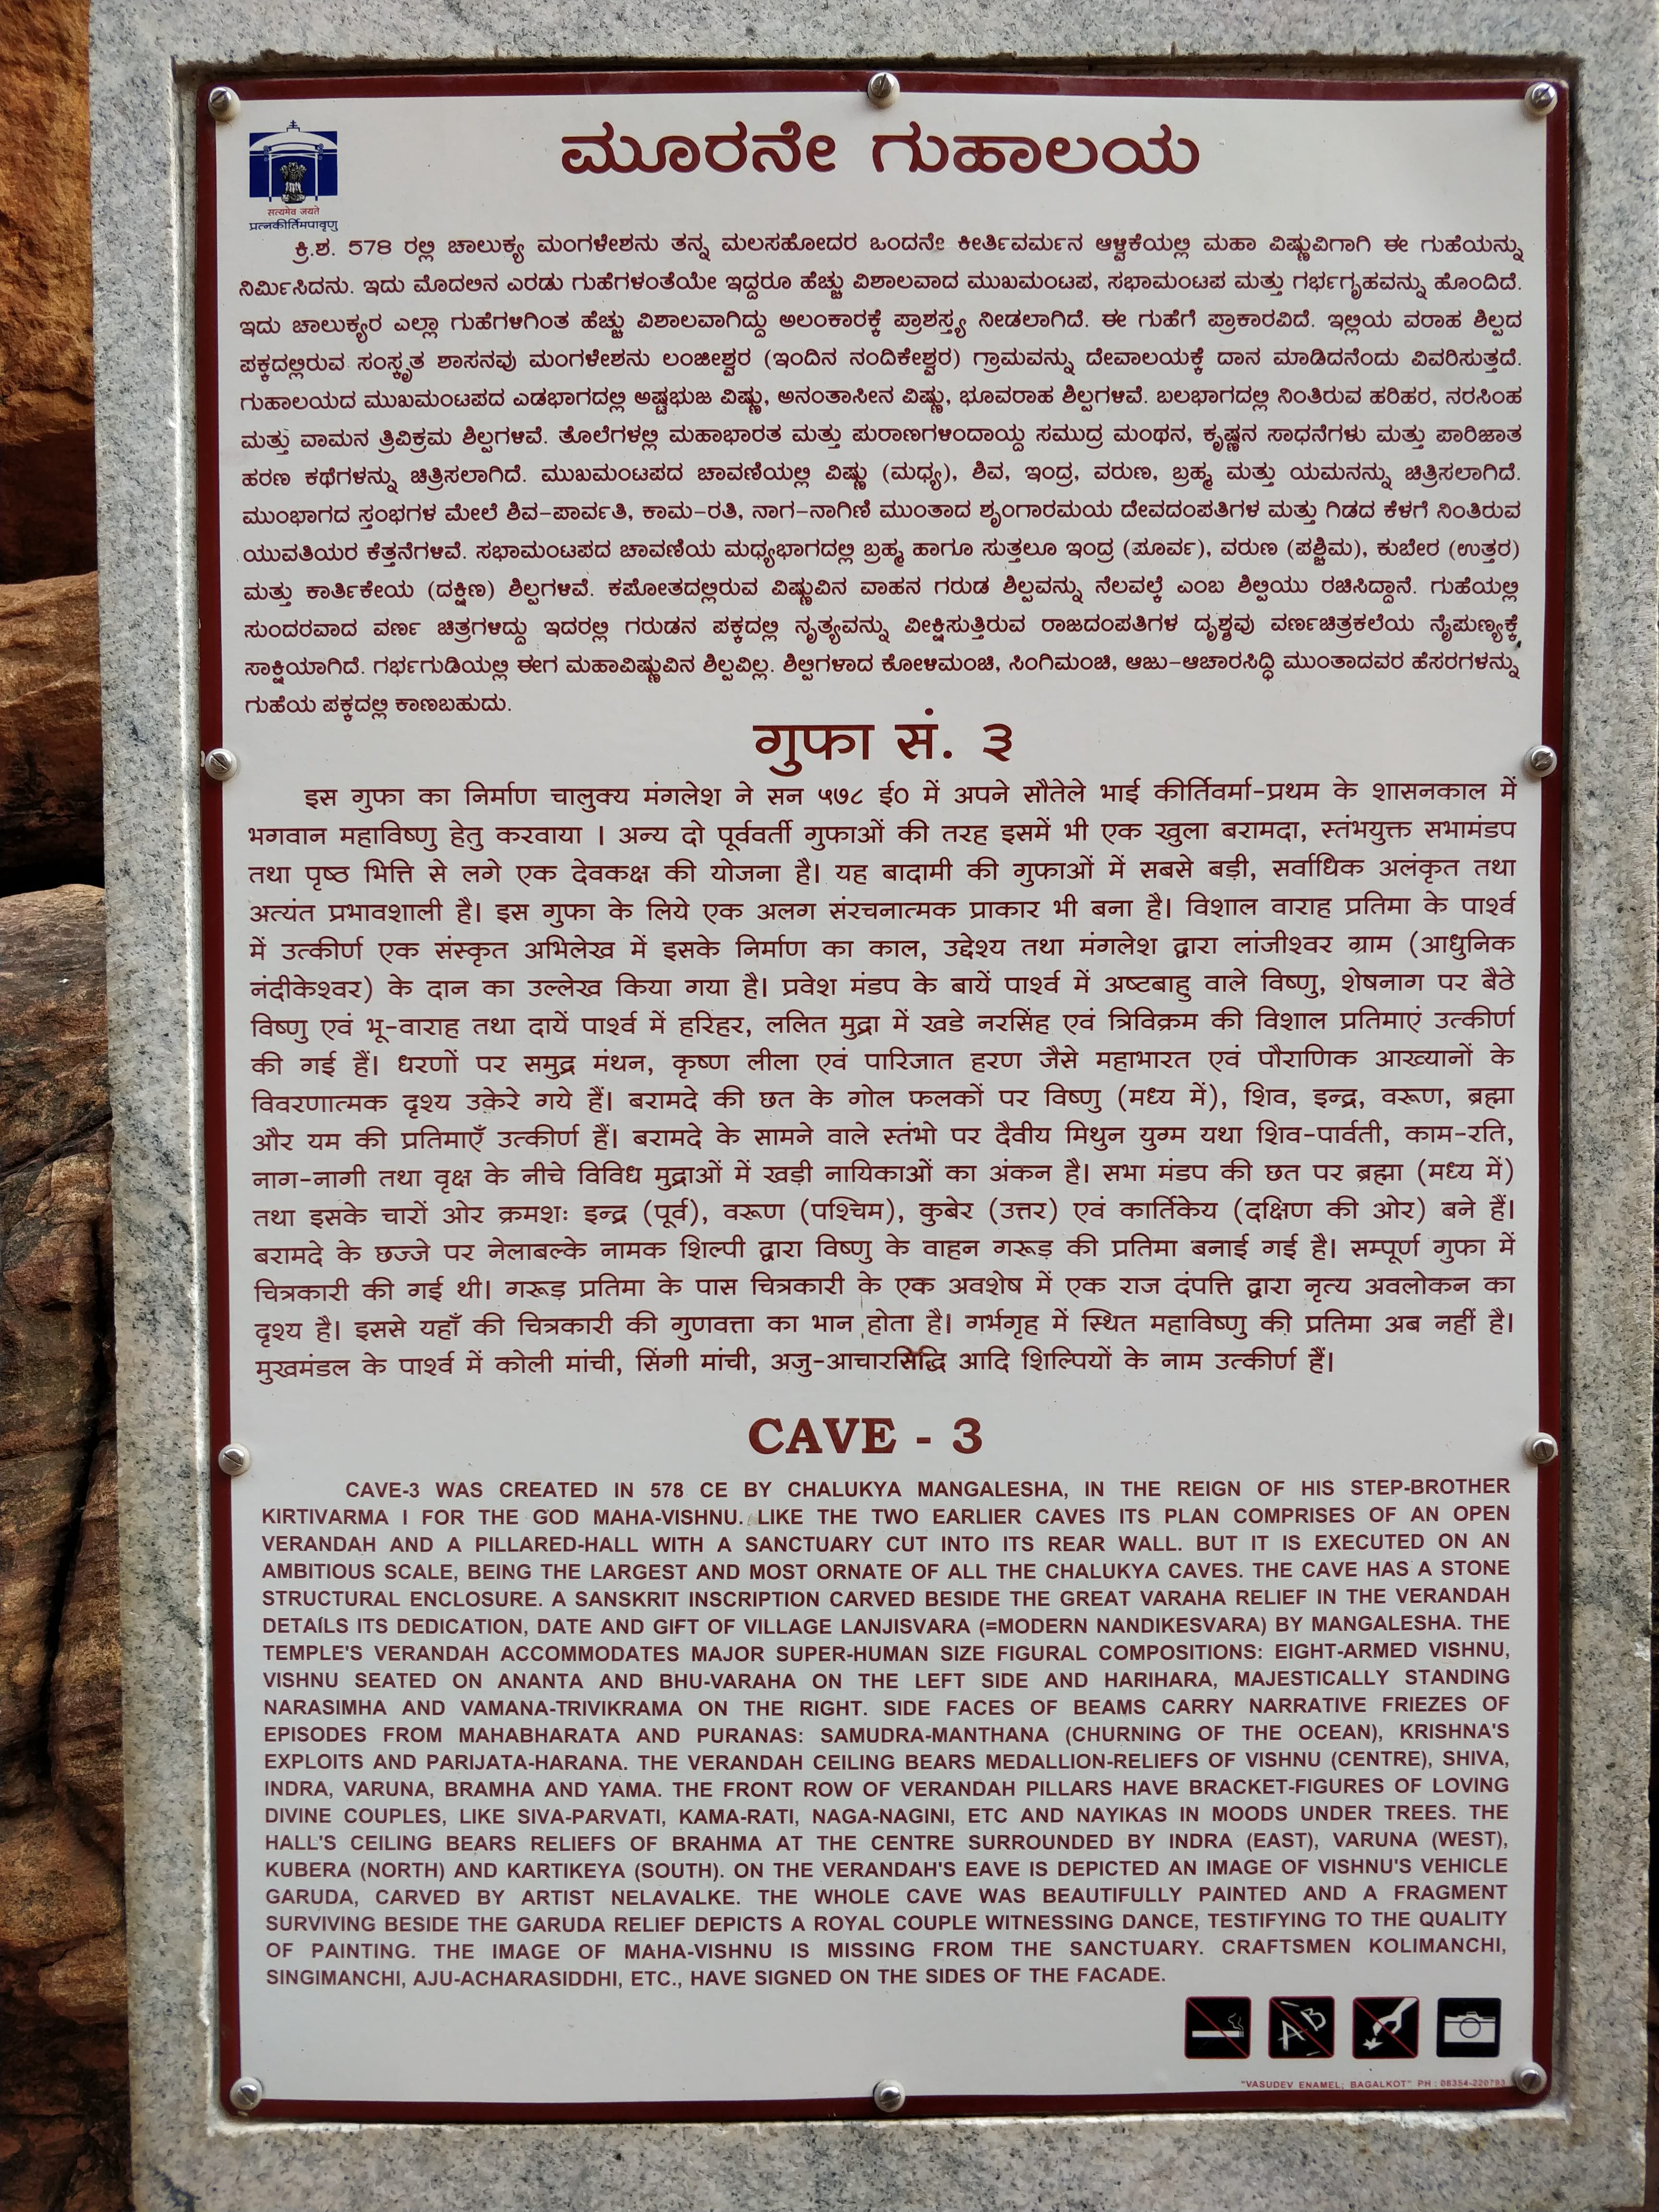 info board - Third cave temple